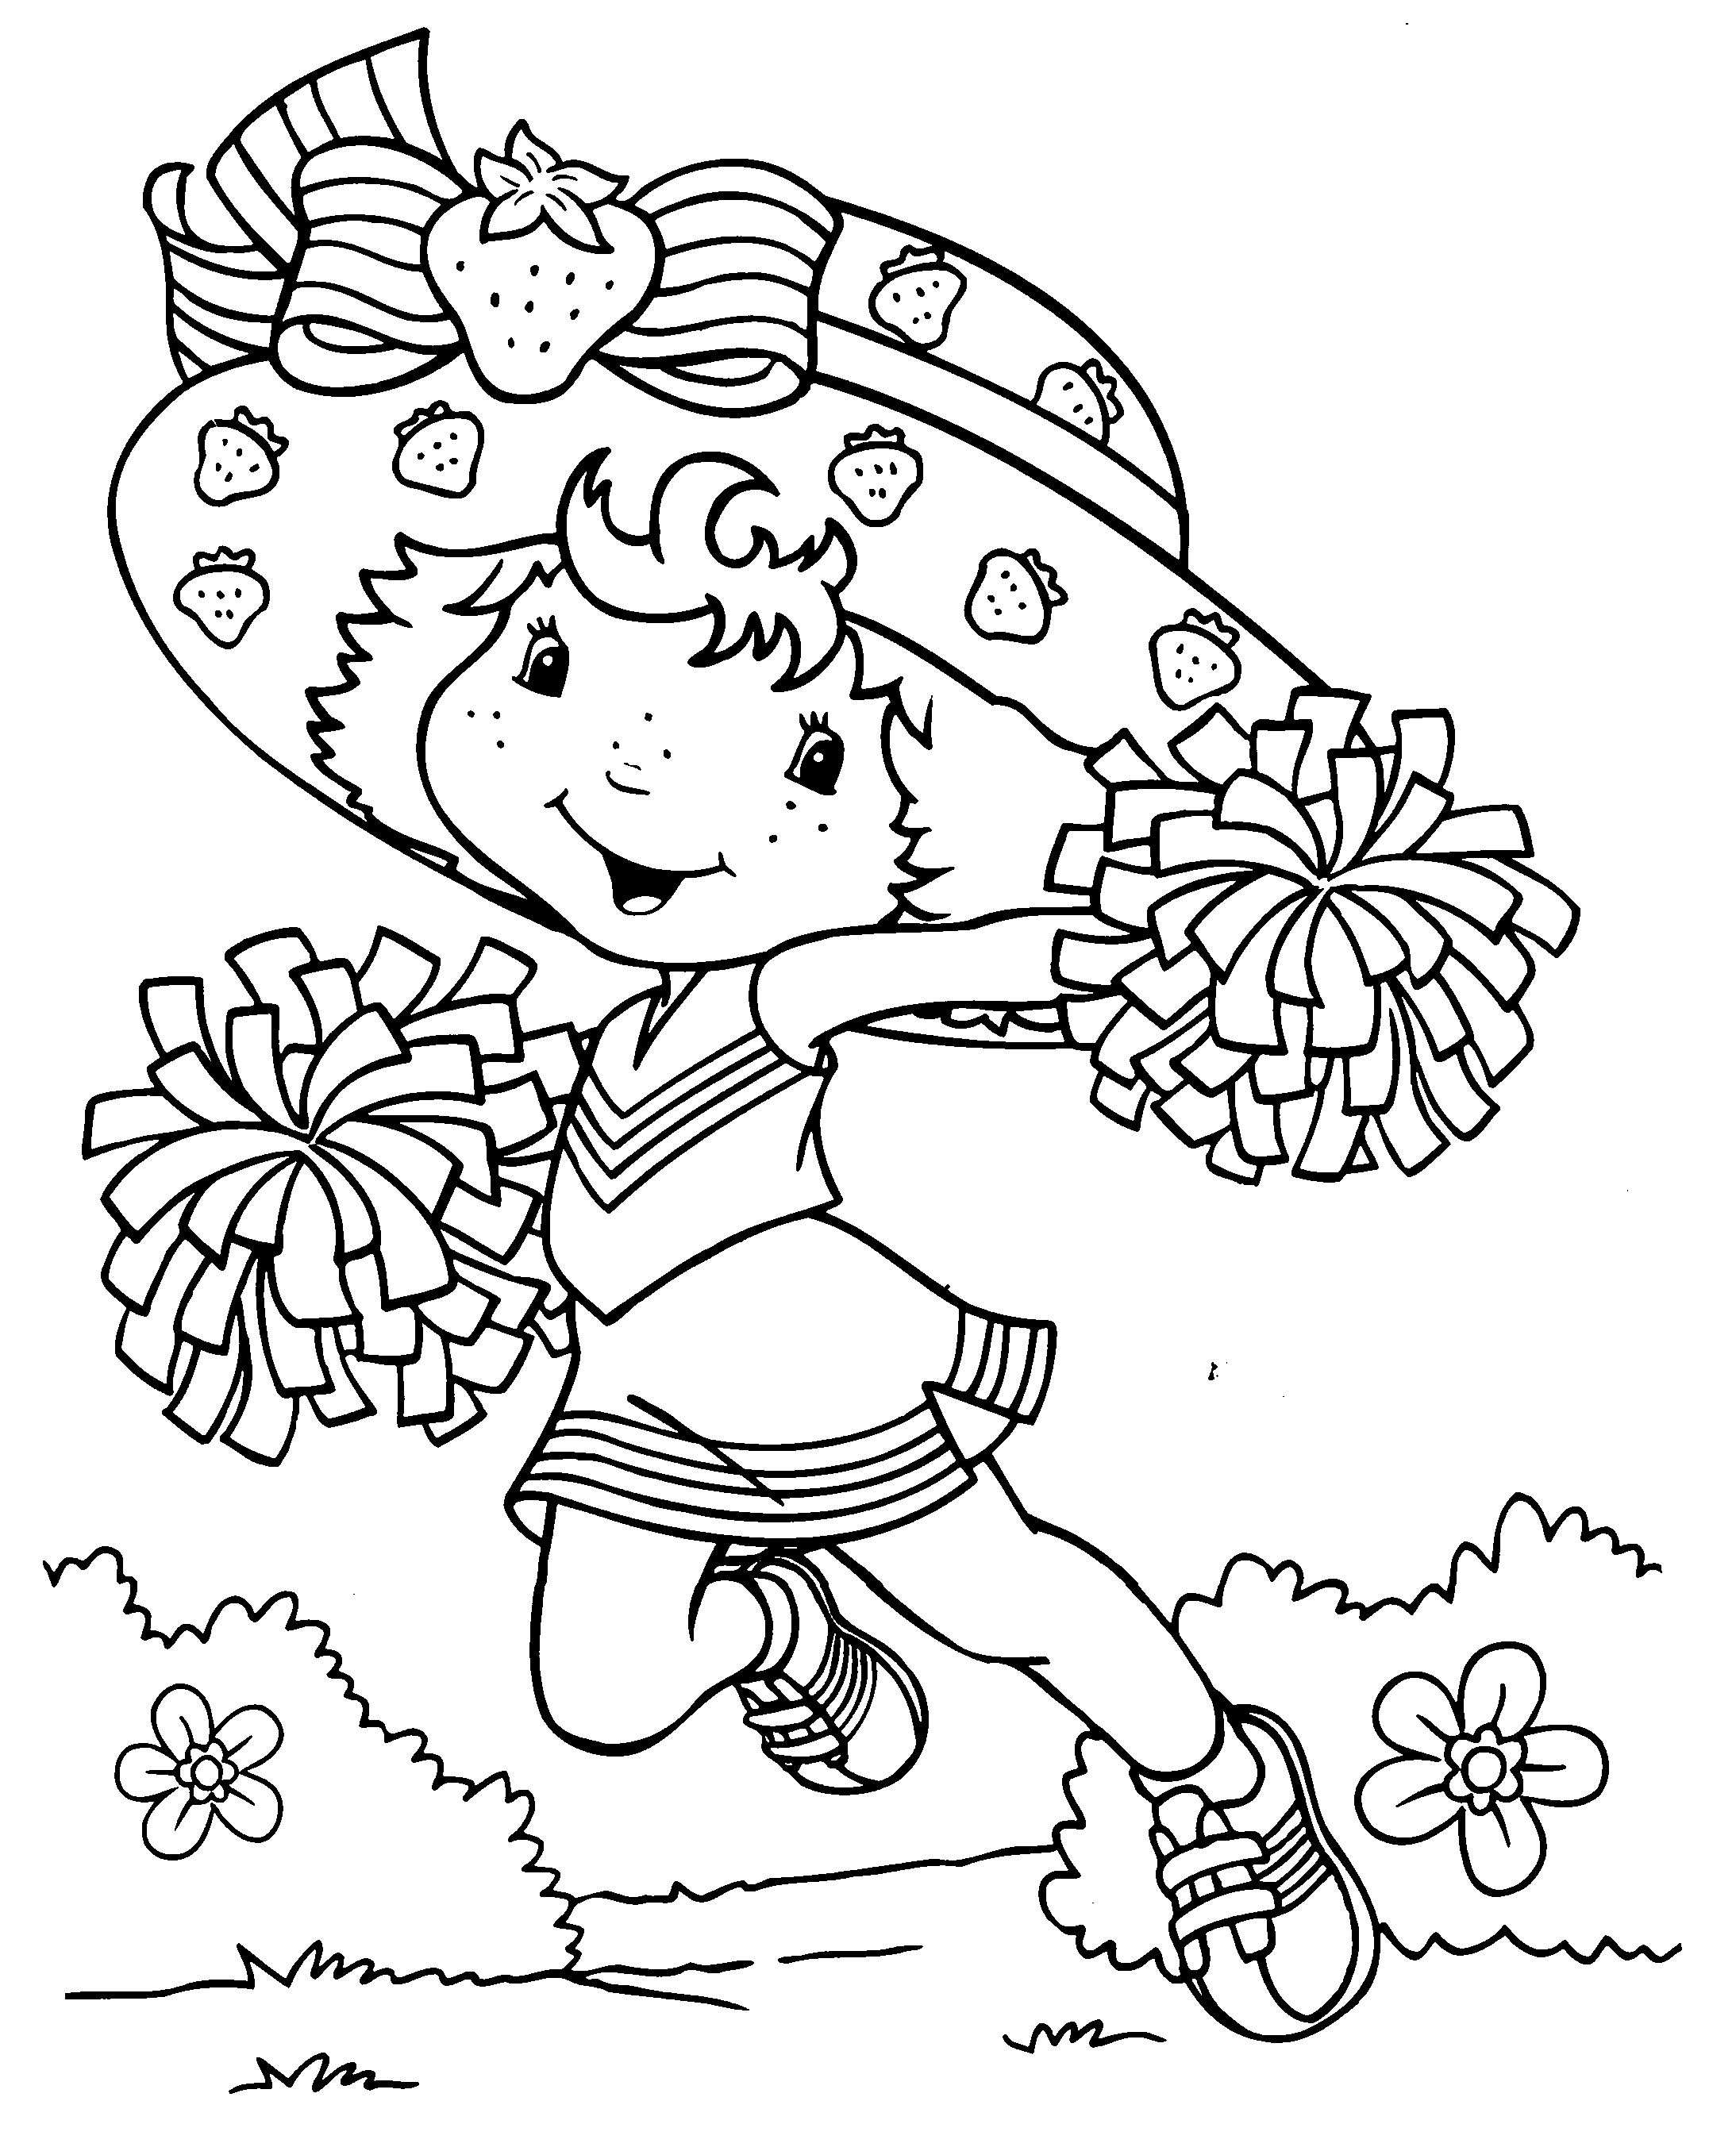 Strawberry Shortcake Coloring Pages / Cool coloring pages / 17